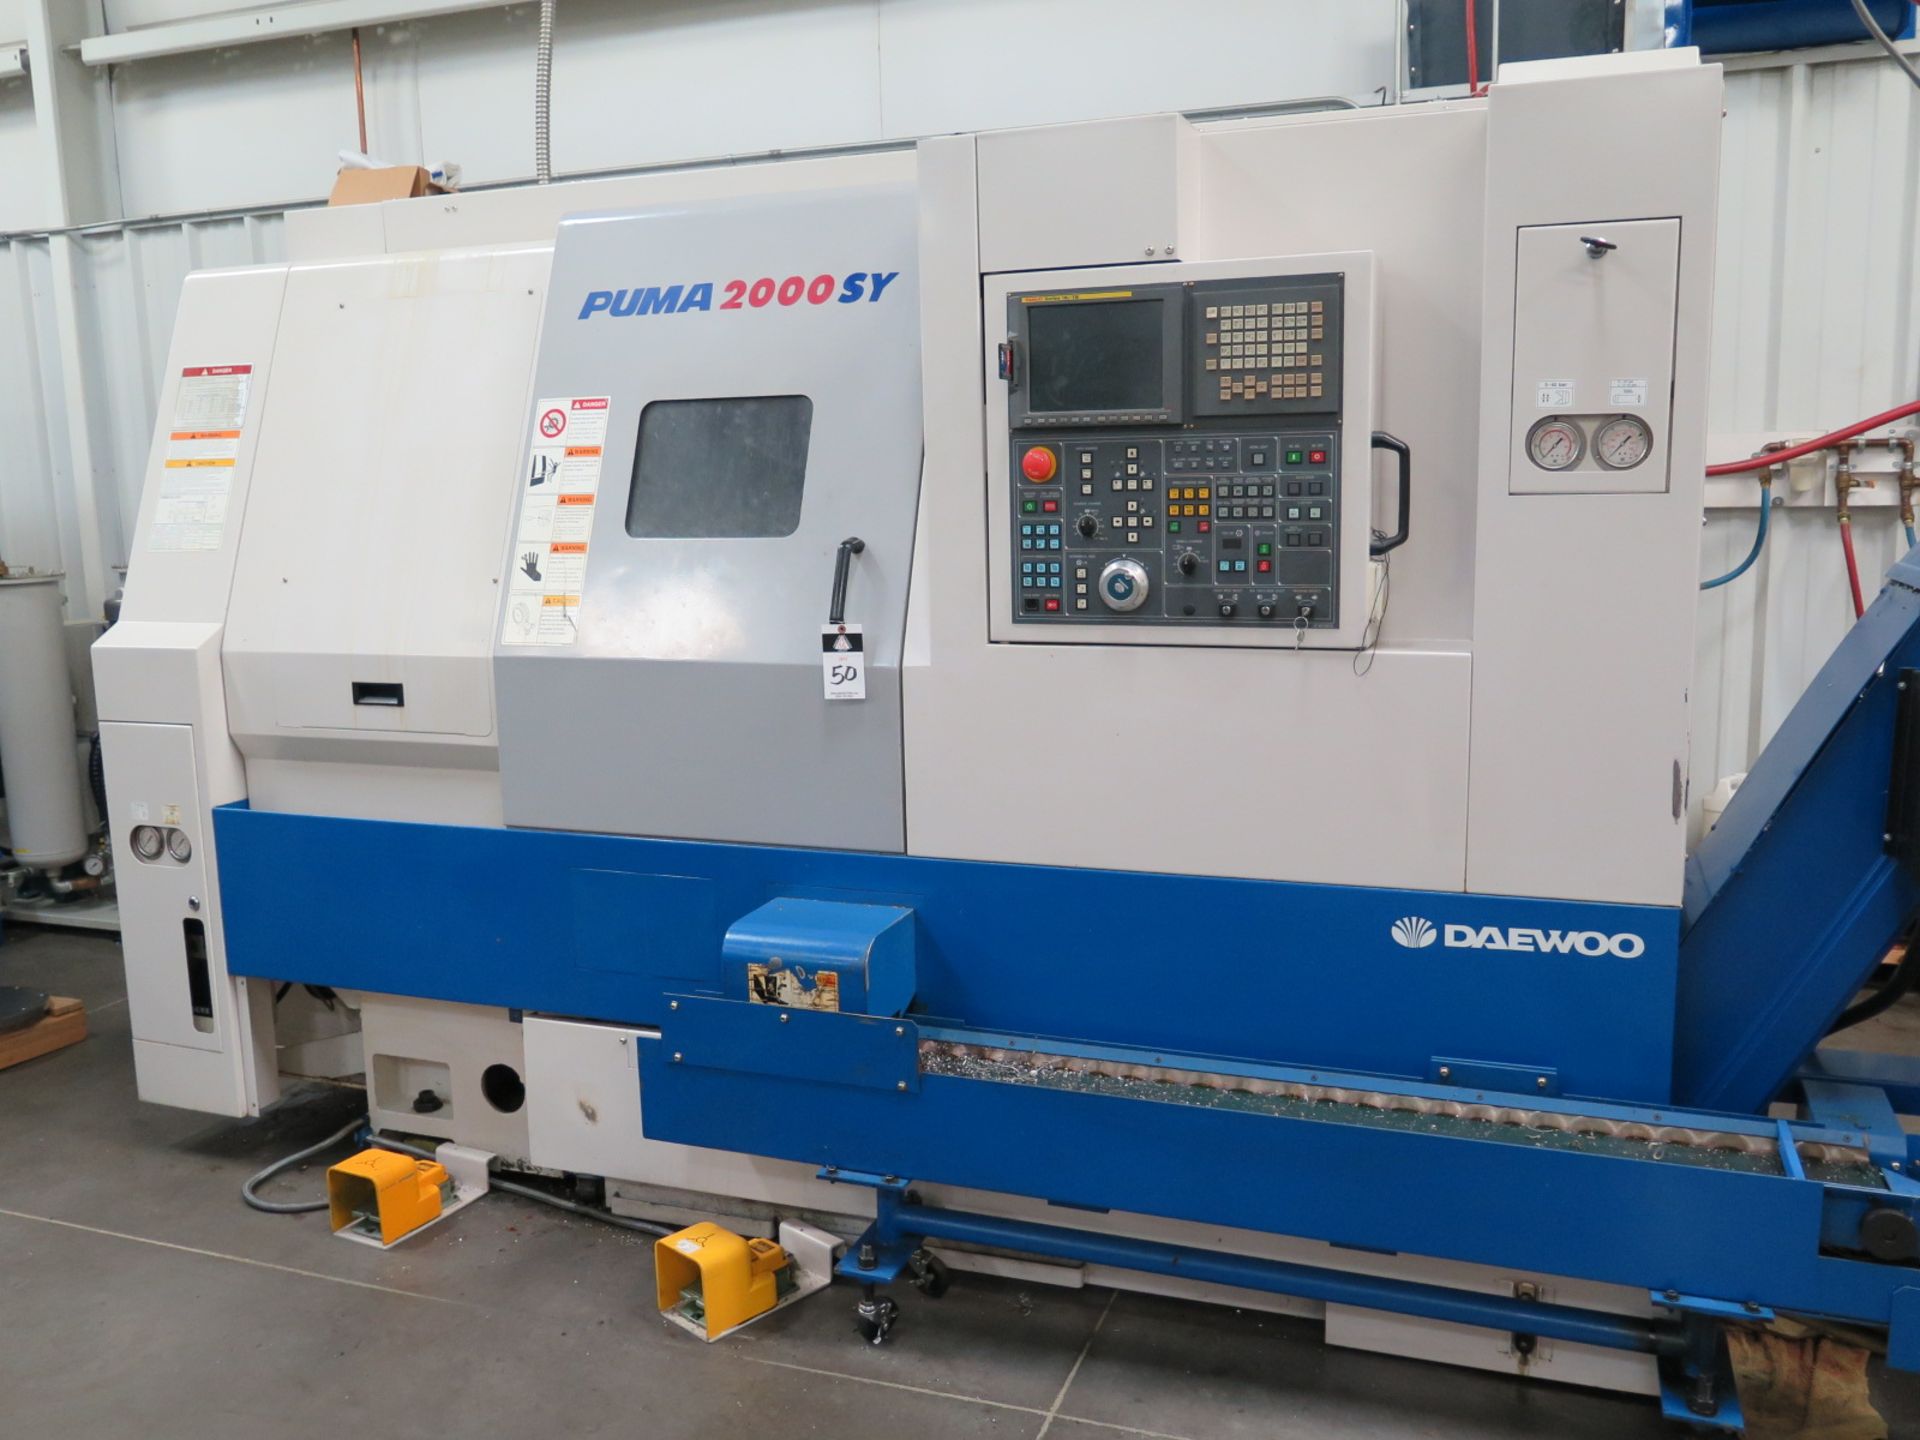 2003 Daewoo PUMA 2000SY Twin Spindle Live Turret CNC Turning Center s/n P200SY0202 w/ Fanuc Series